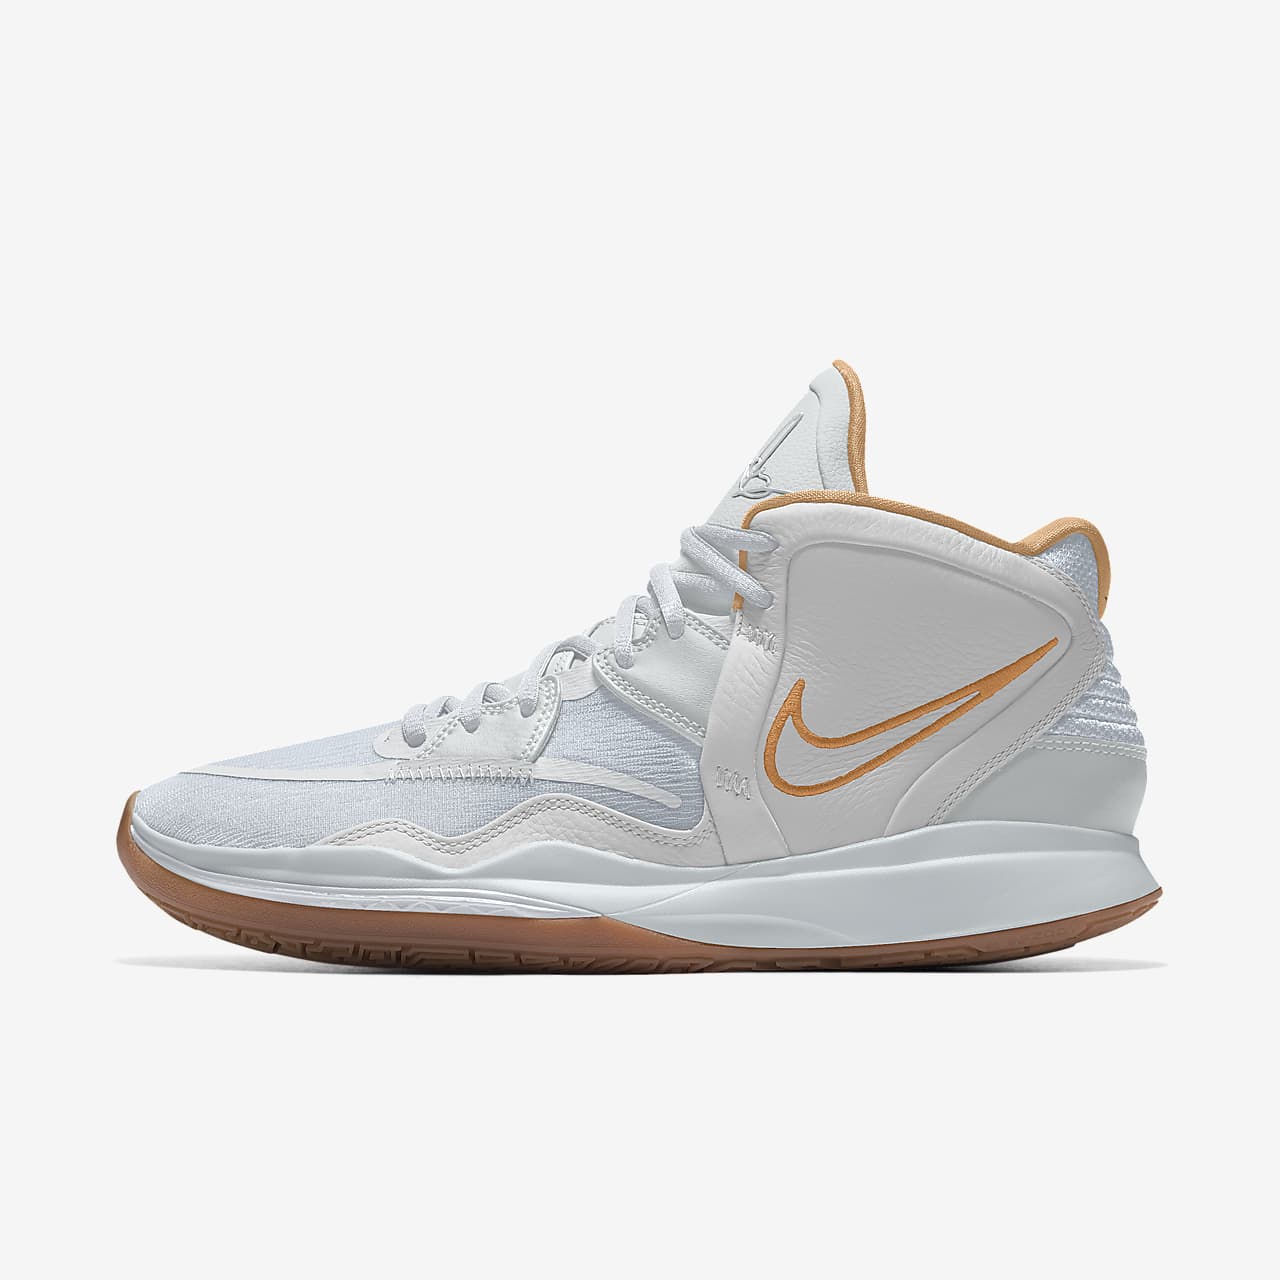 Chaussure de basketball personnalisée Kyrie Infinity By You